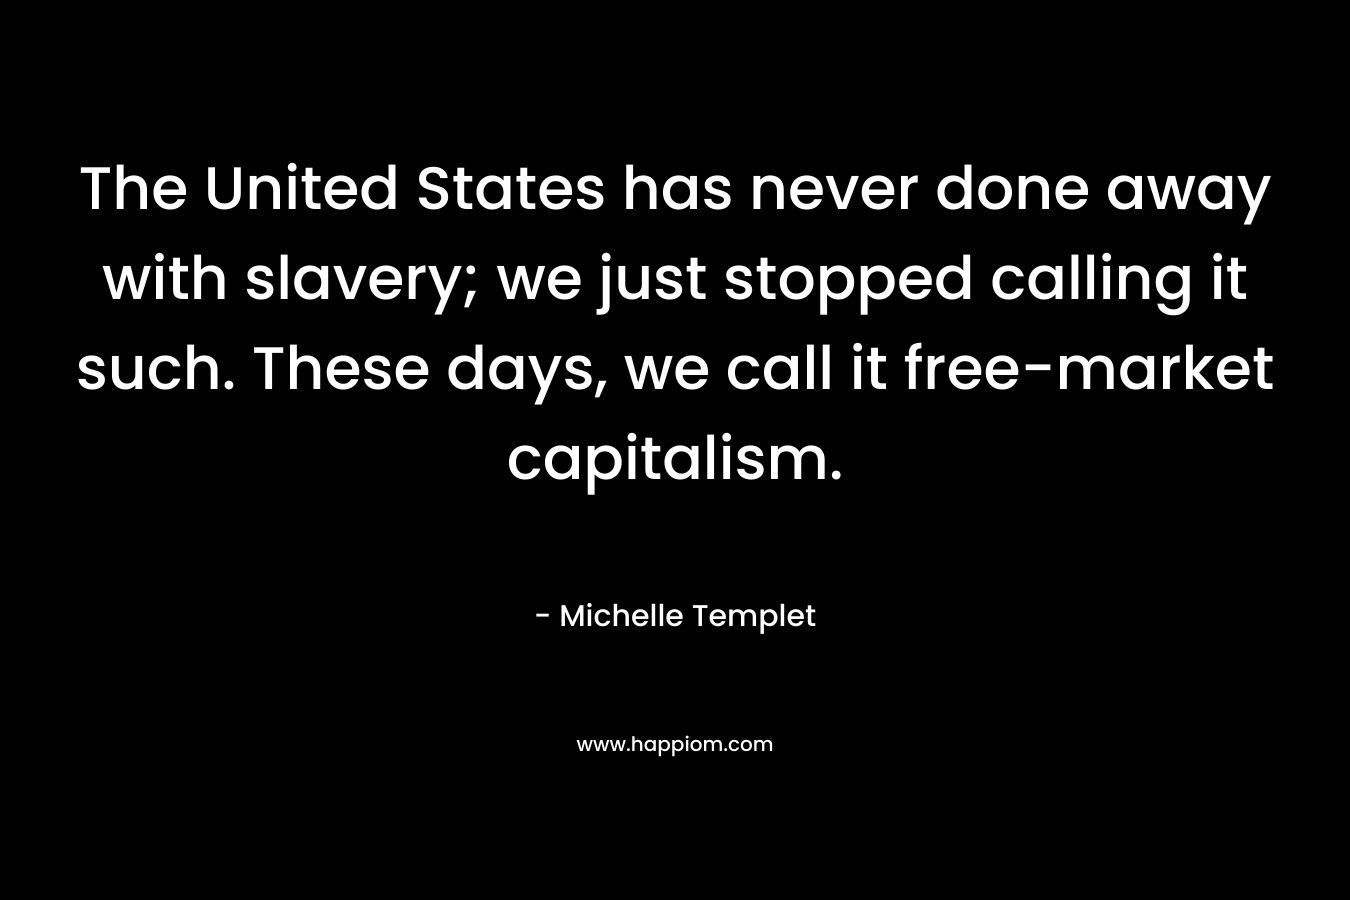 The United States has never done away with slavery; we just stopped calling it such. These days, we call it free-market capitalism. – Michelle Templet